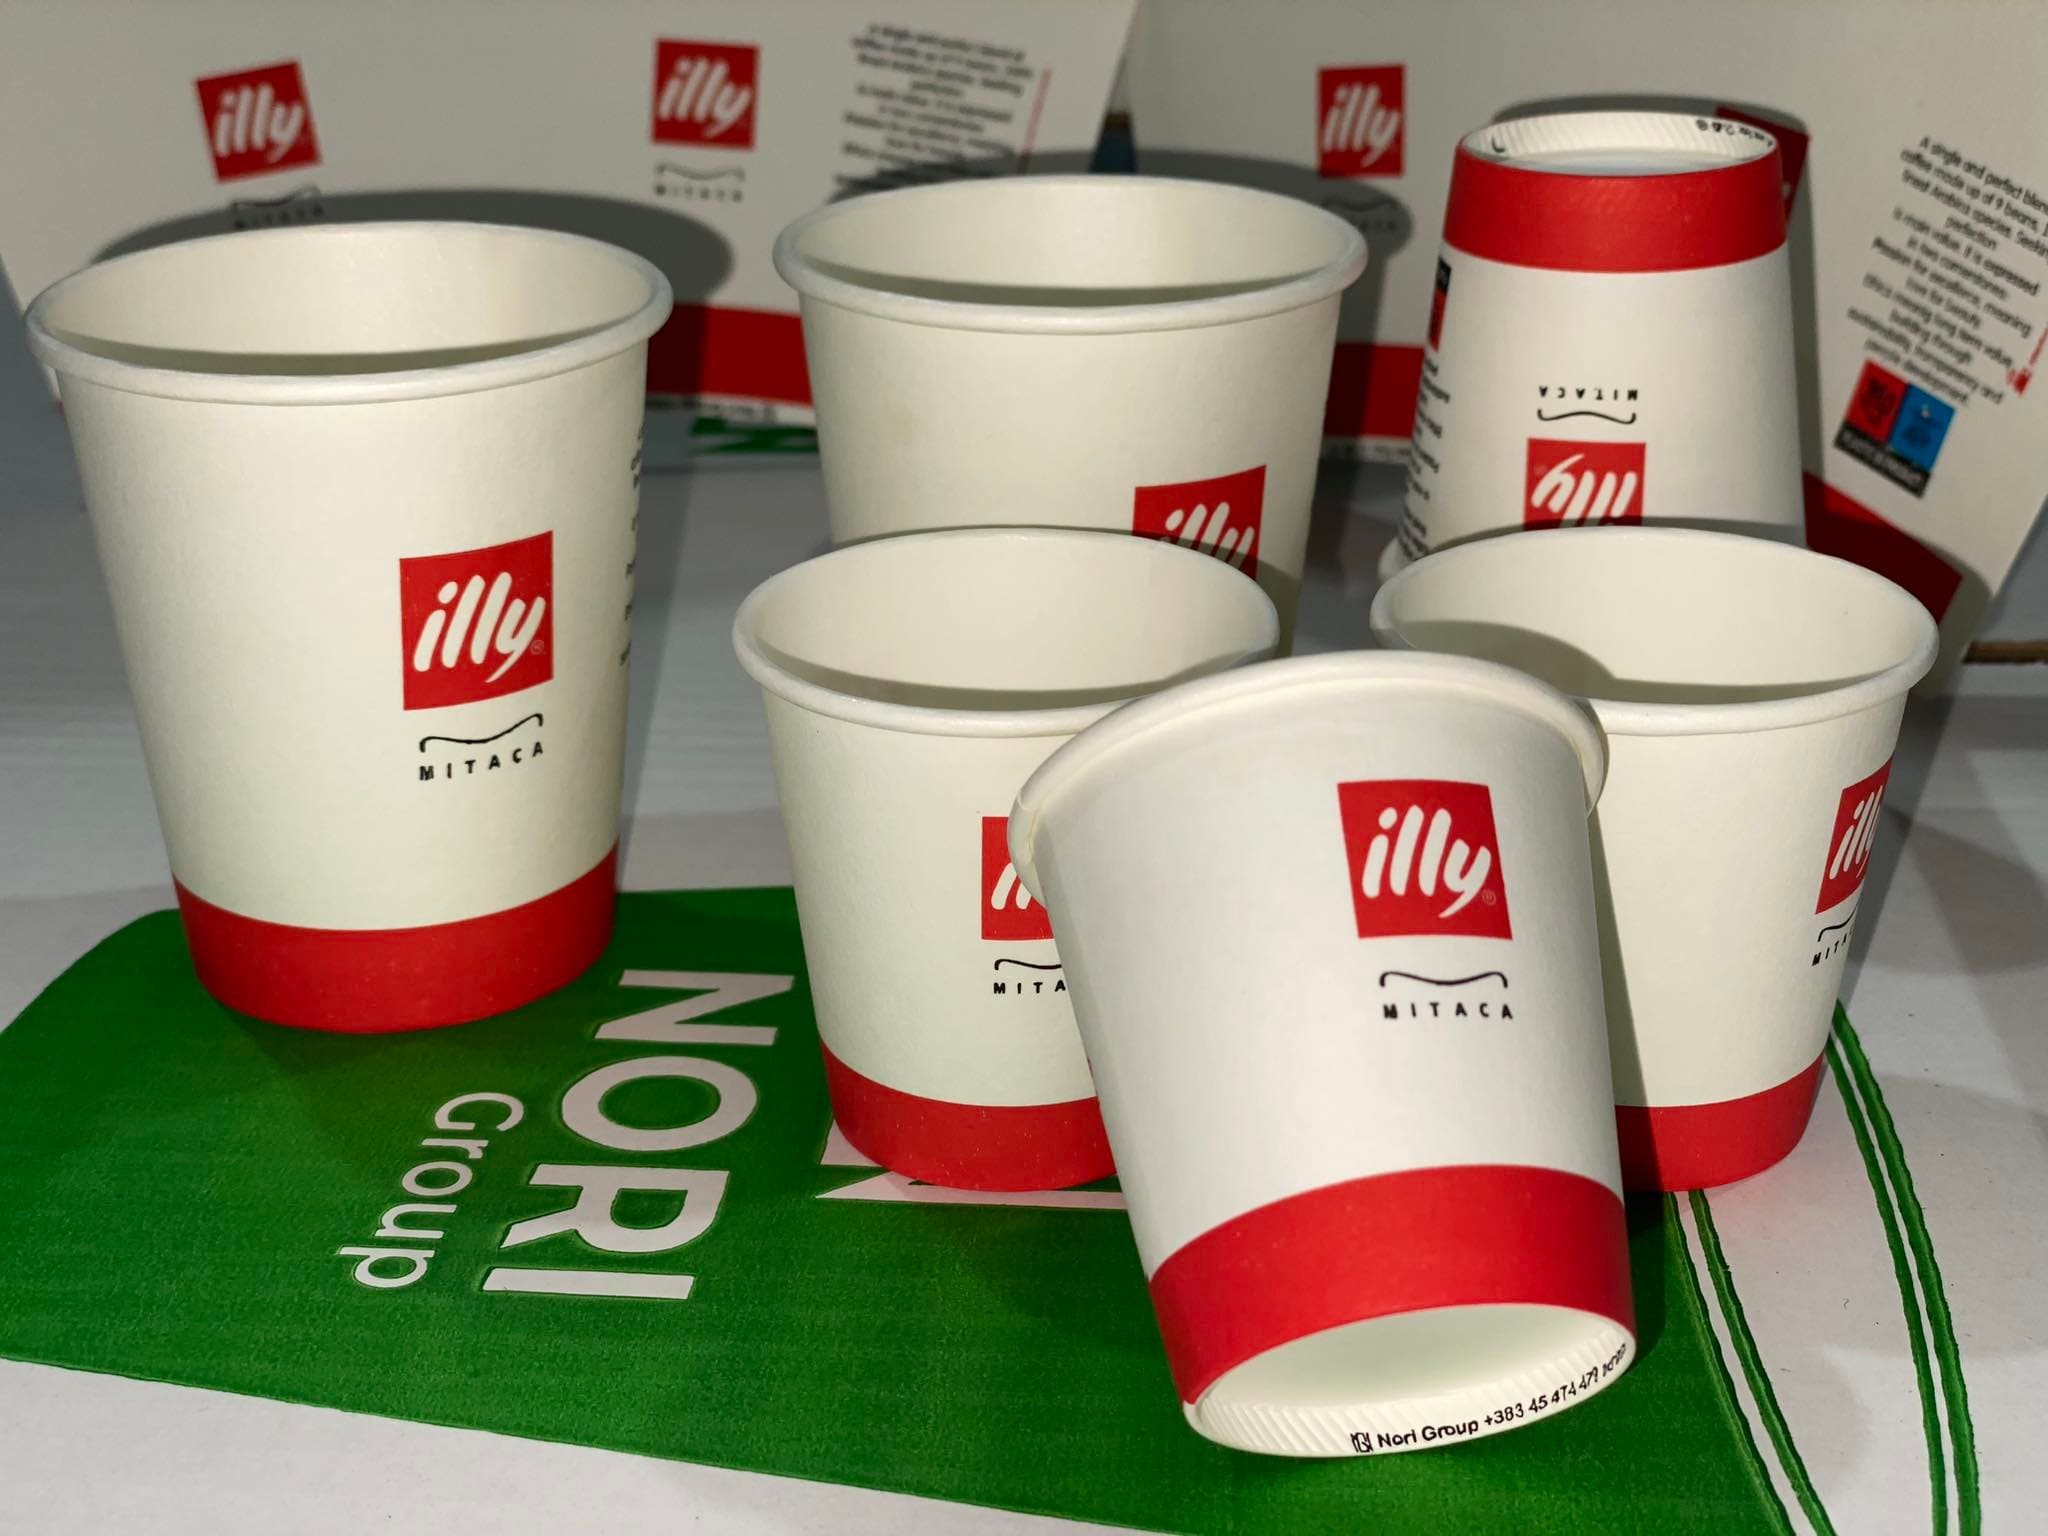 Nori Group (paper cups) image gallery 02